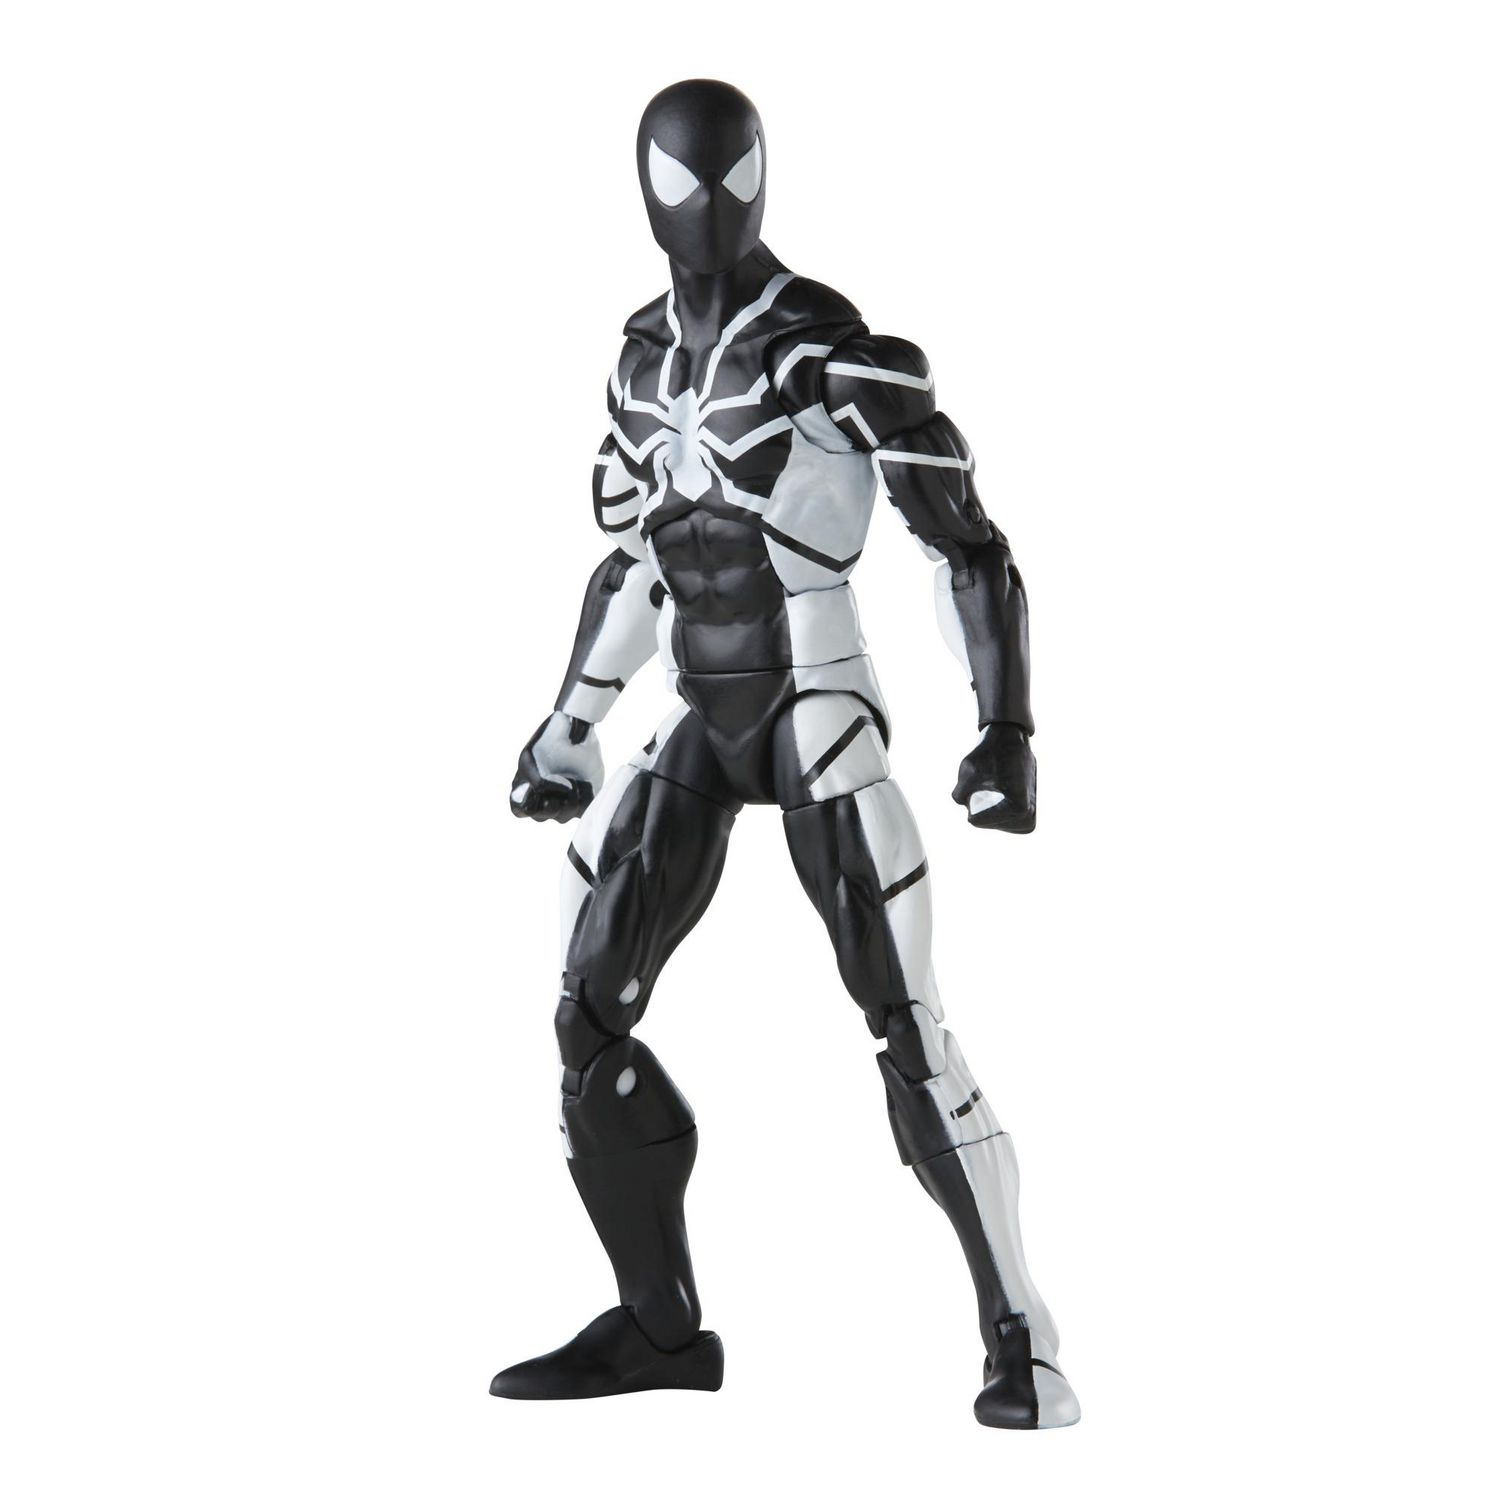 Hot Toys Spider-Man Far From Home Stealth Suit Masterpiece Series #904857